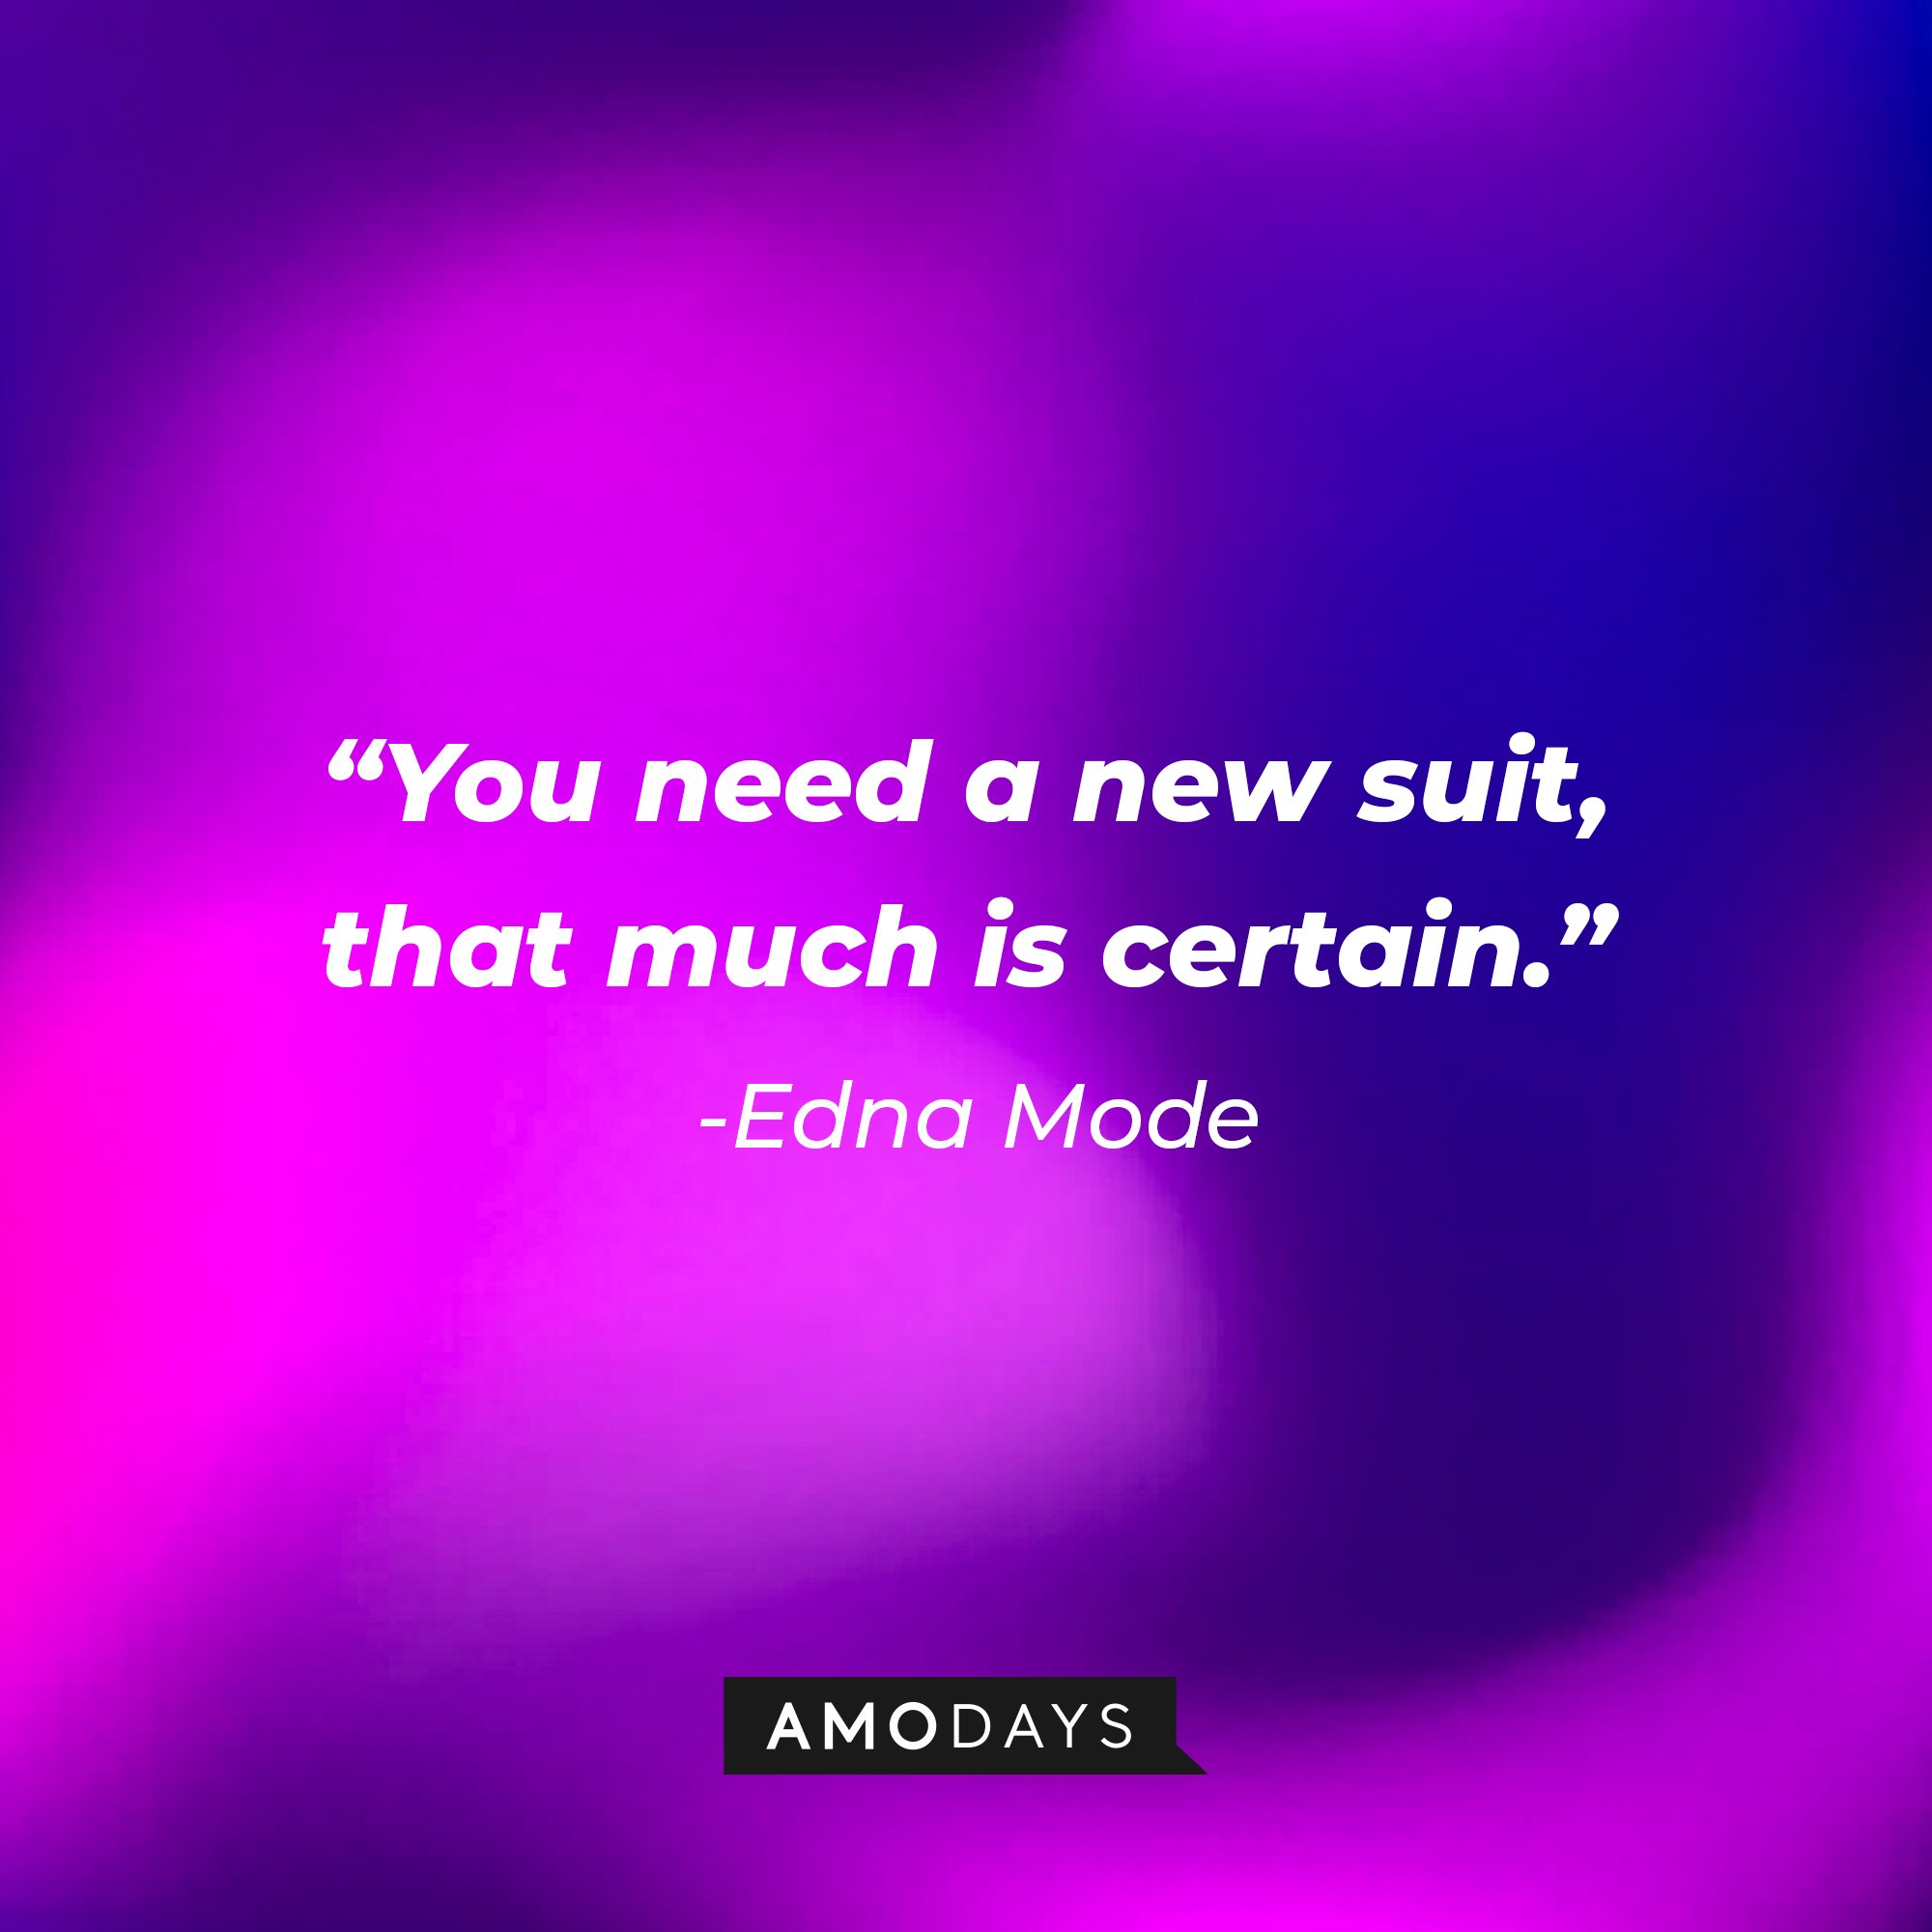 Edna Mode’s quote: "You need a new suit, that much is certain." | Image: AmoDays